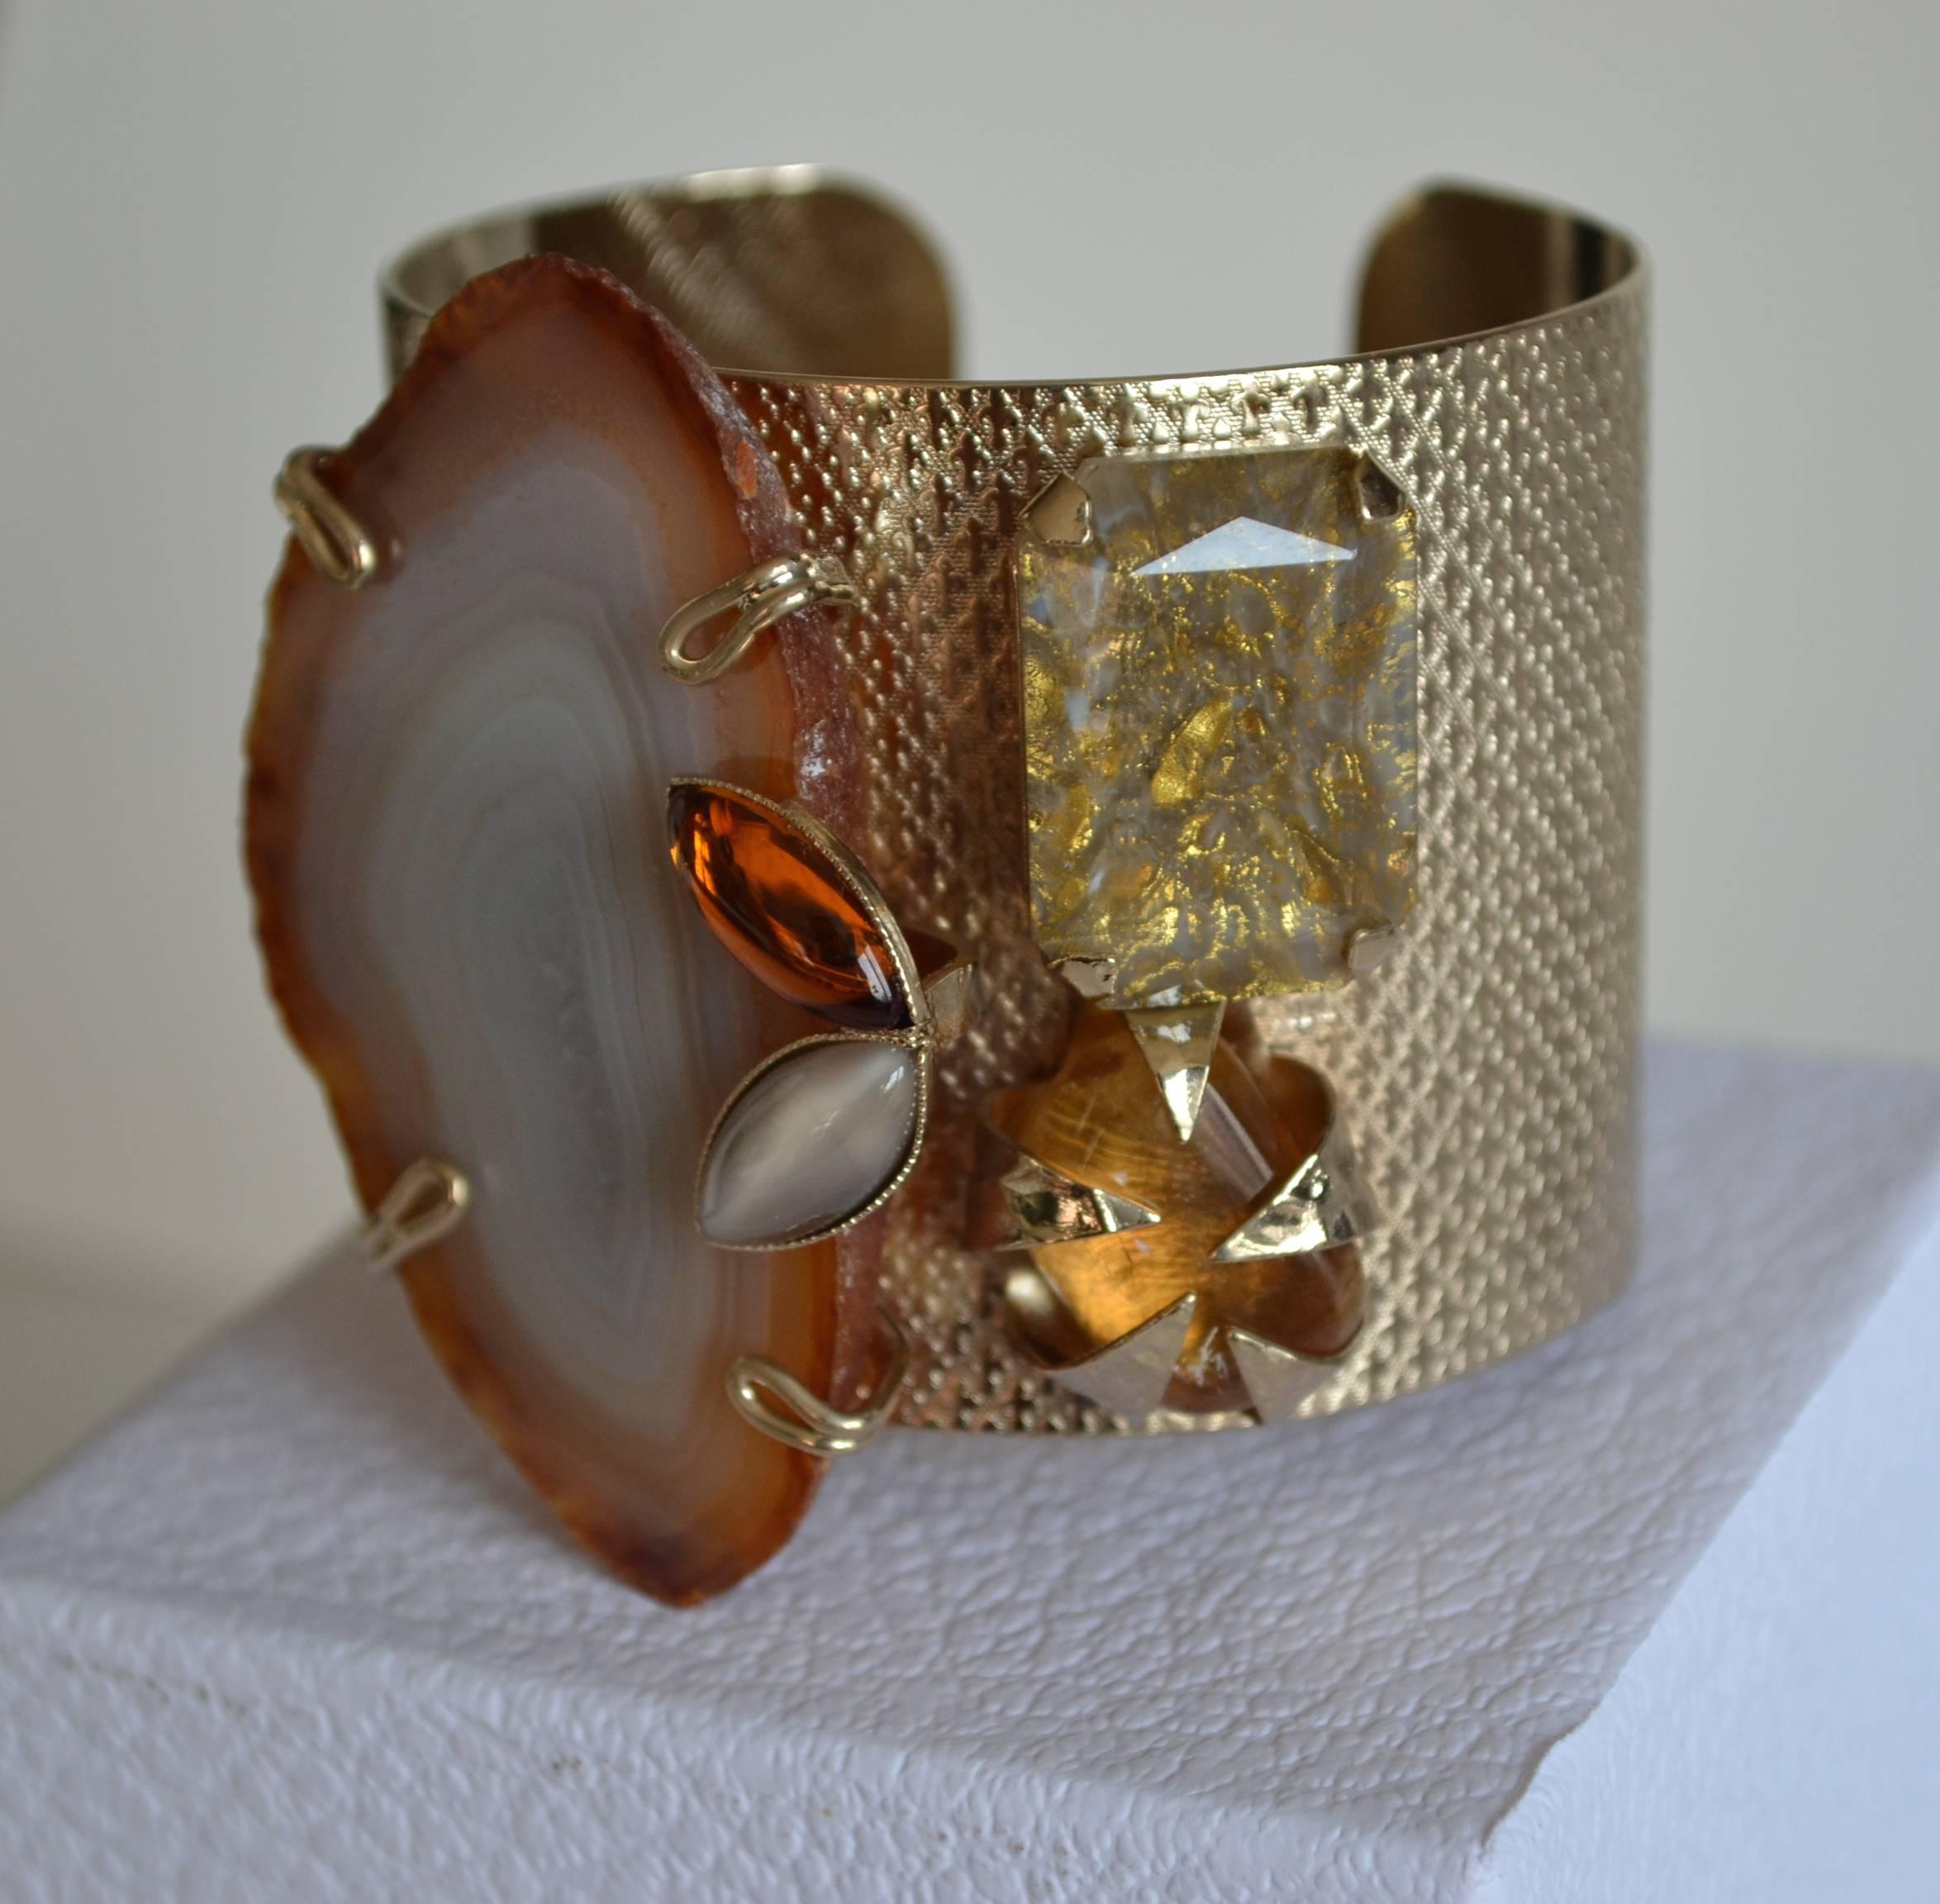 Gorgeous agate, glass and crystal cuff from Philippe Ferrandis. Metal is soft and molds to both large and small wrists. 